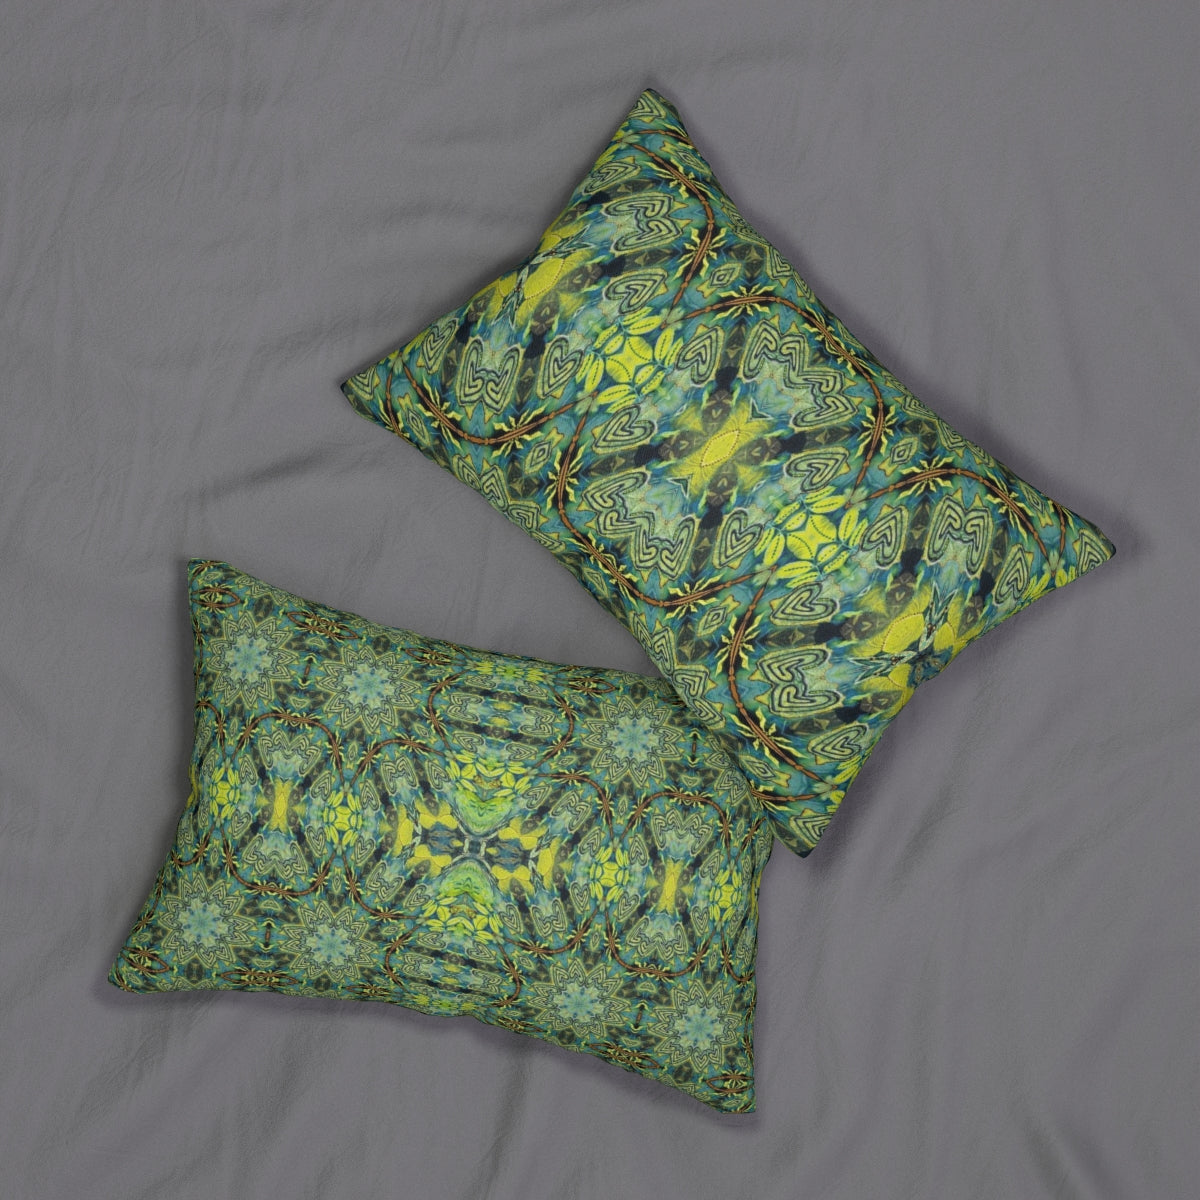 lumbar pillow with different design in blue and  green on  each side